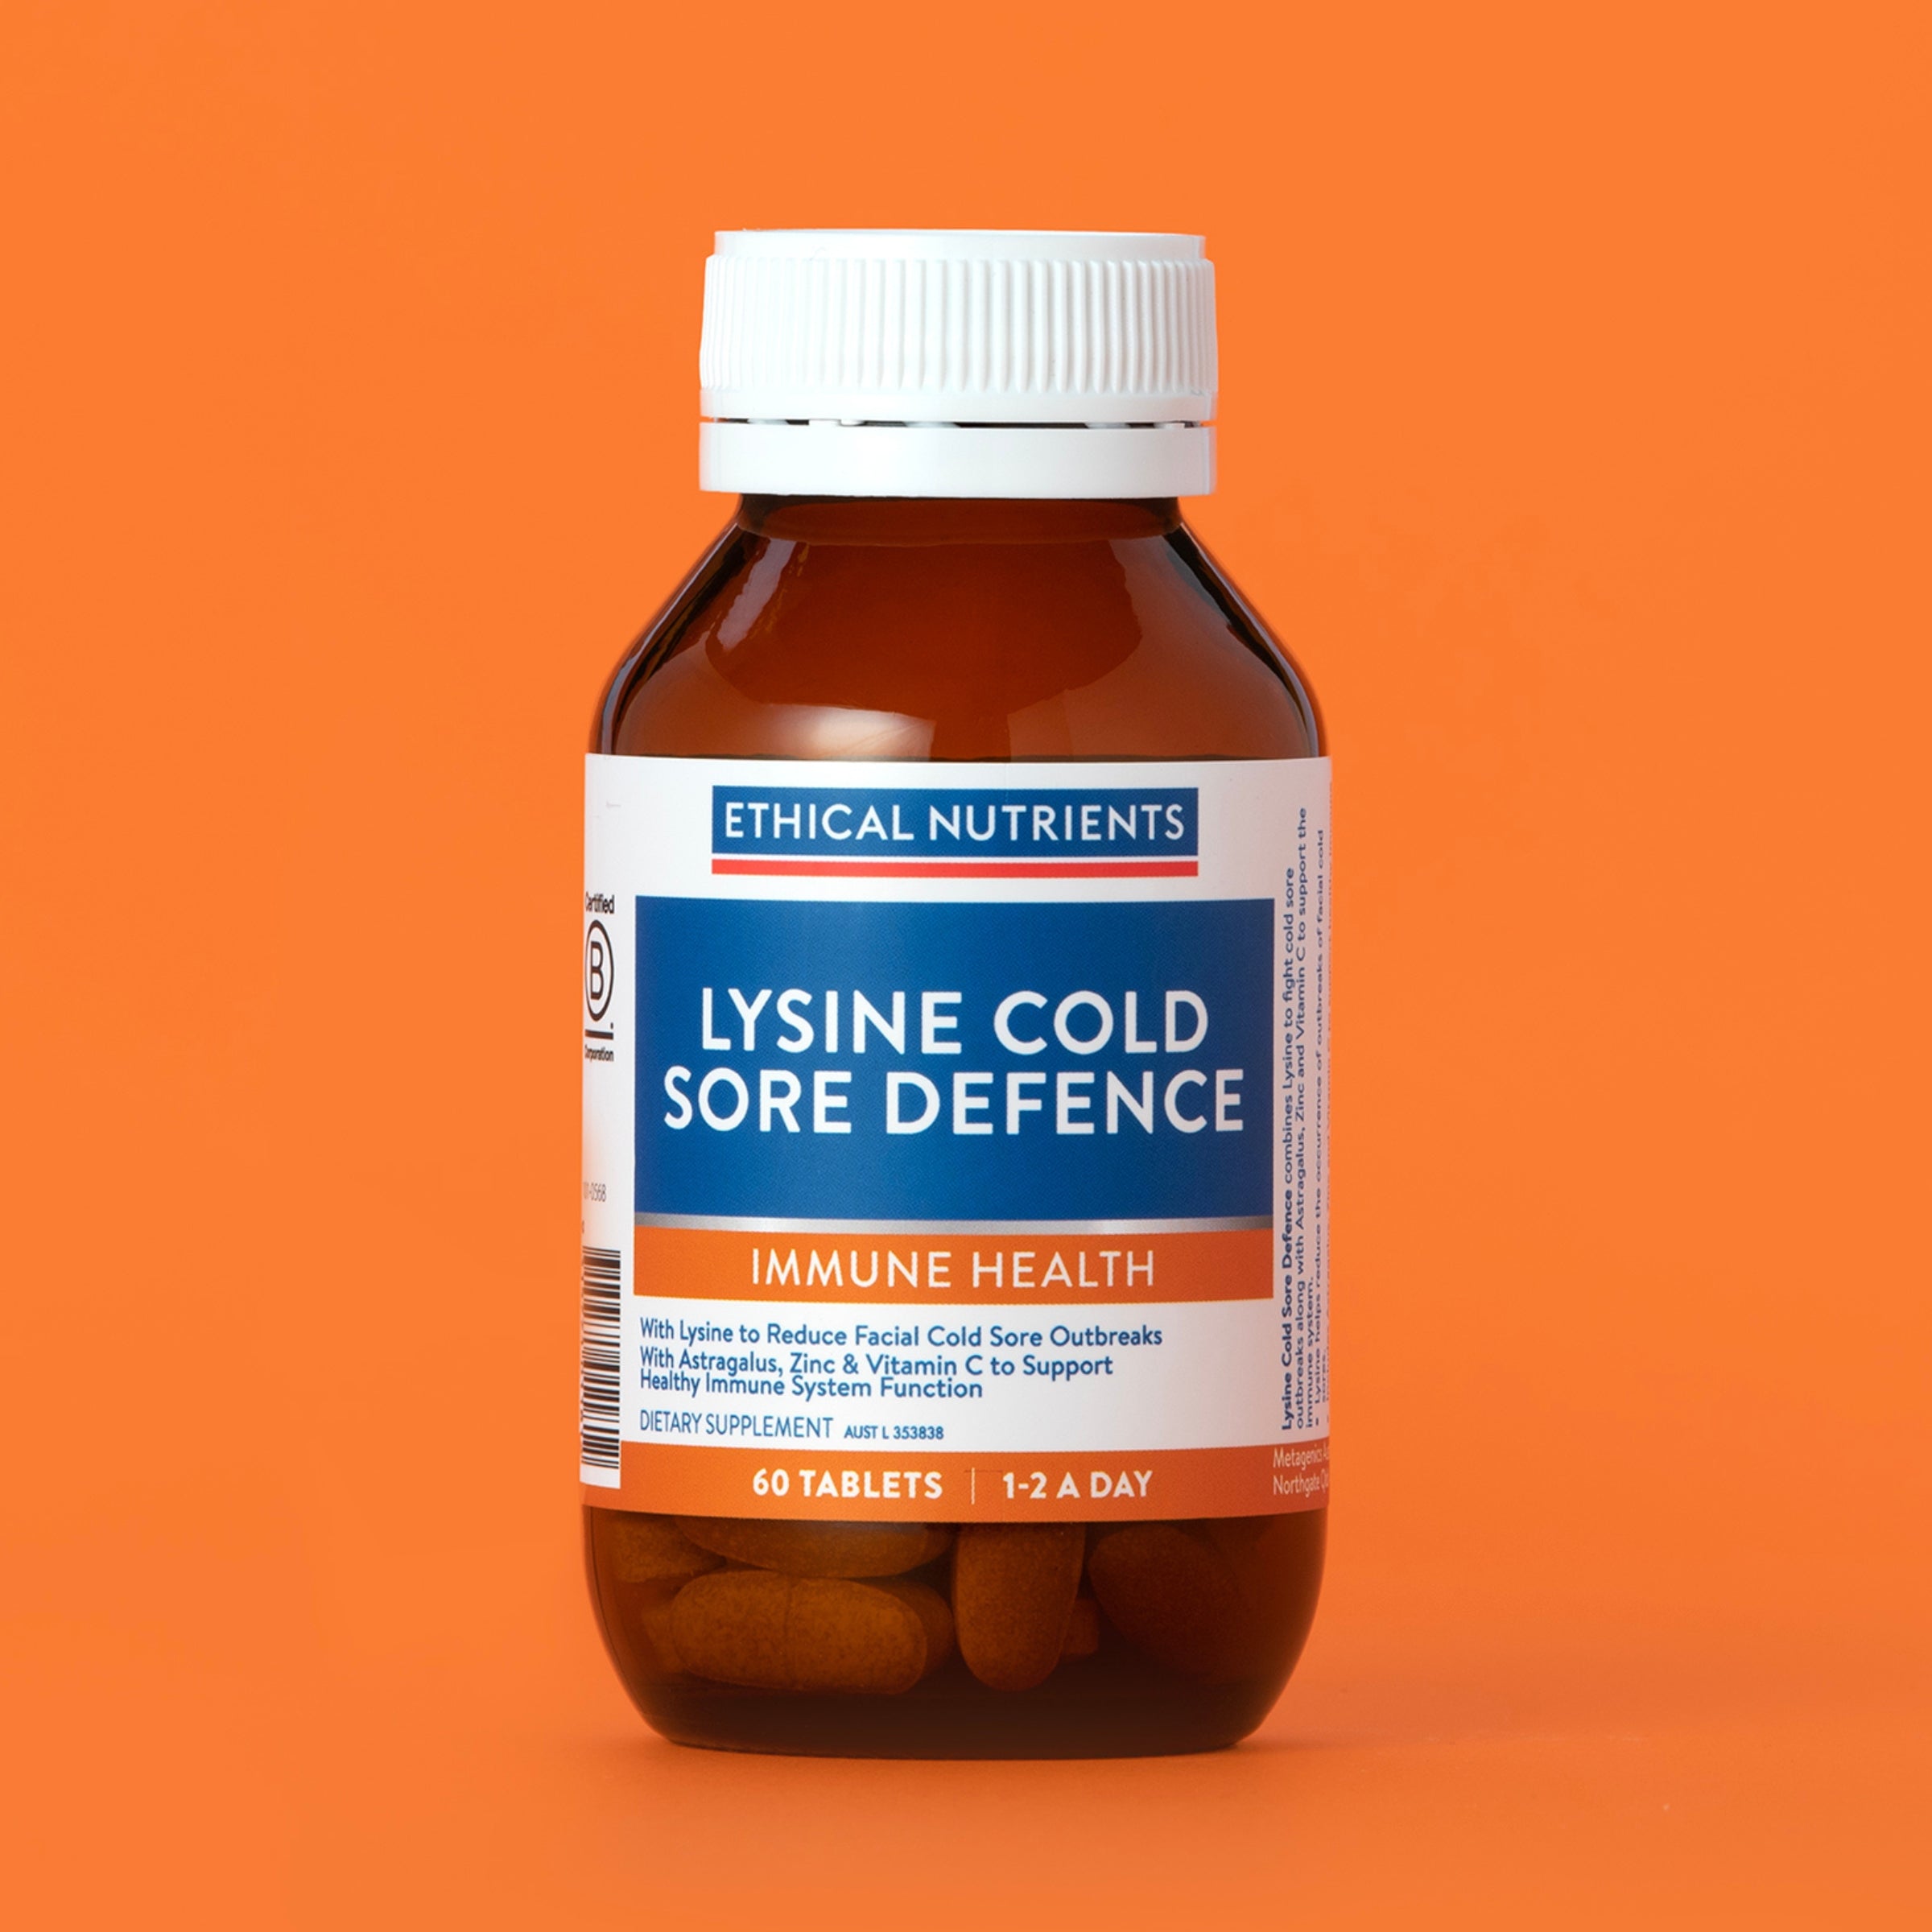 Ethical Nutrients Lysine Cold Sore Defence 60 Tablets #size_60 tablets